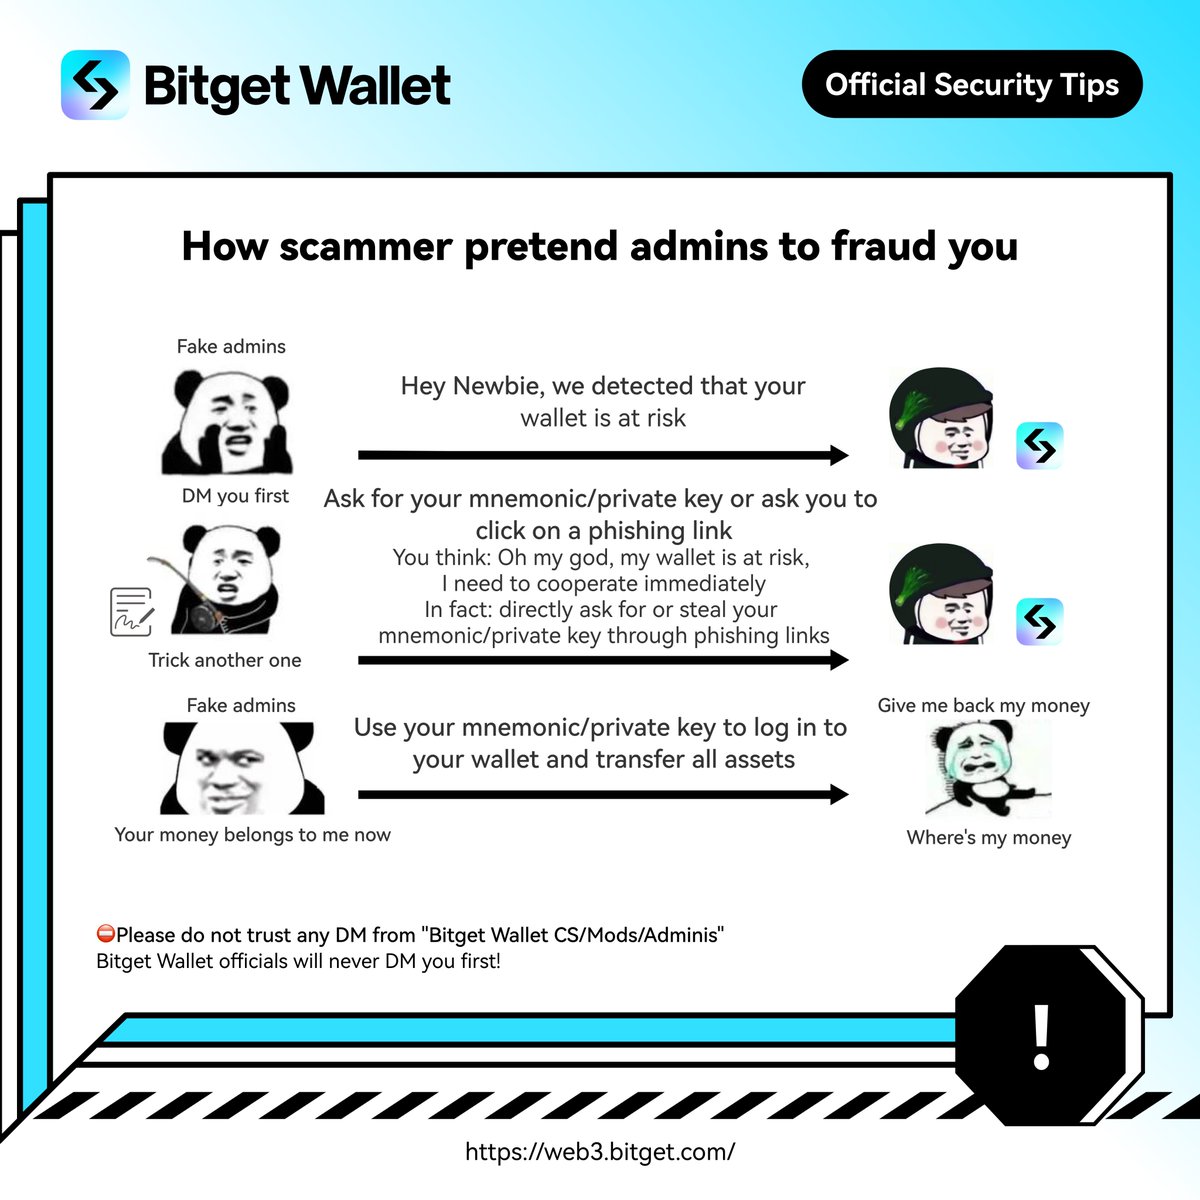 Hello frens! In the last educational post, we shared some signature authorization and 'advanced' phishing scenarios that are commonly seen 🤓

However, there are still scamming techniques that are hard to spot 🎣

We've provided a few more situations to help you avoid any…